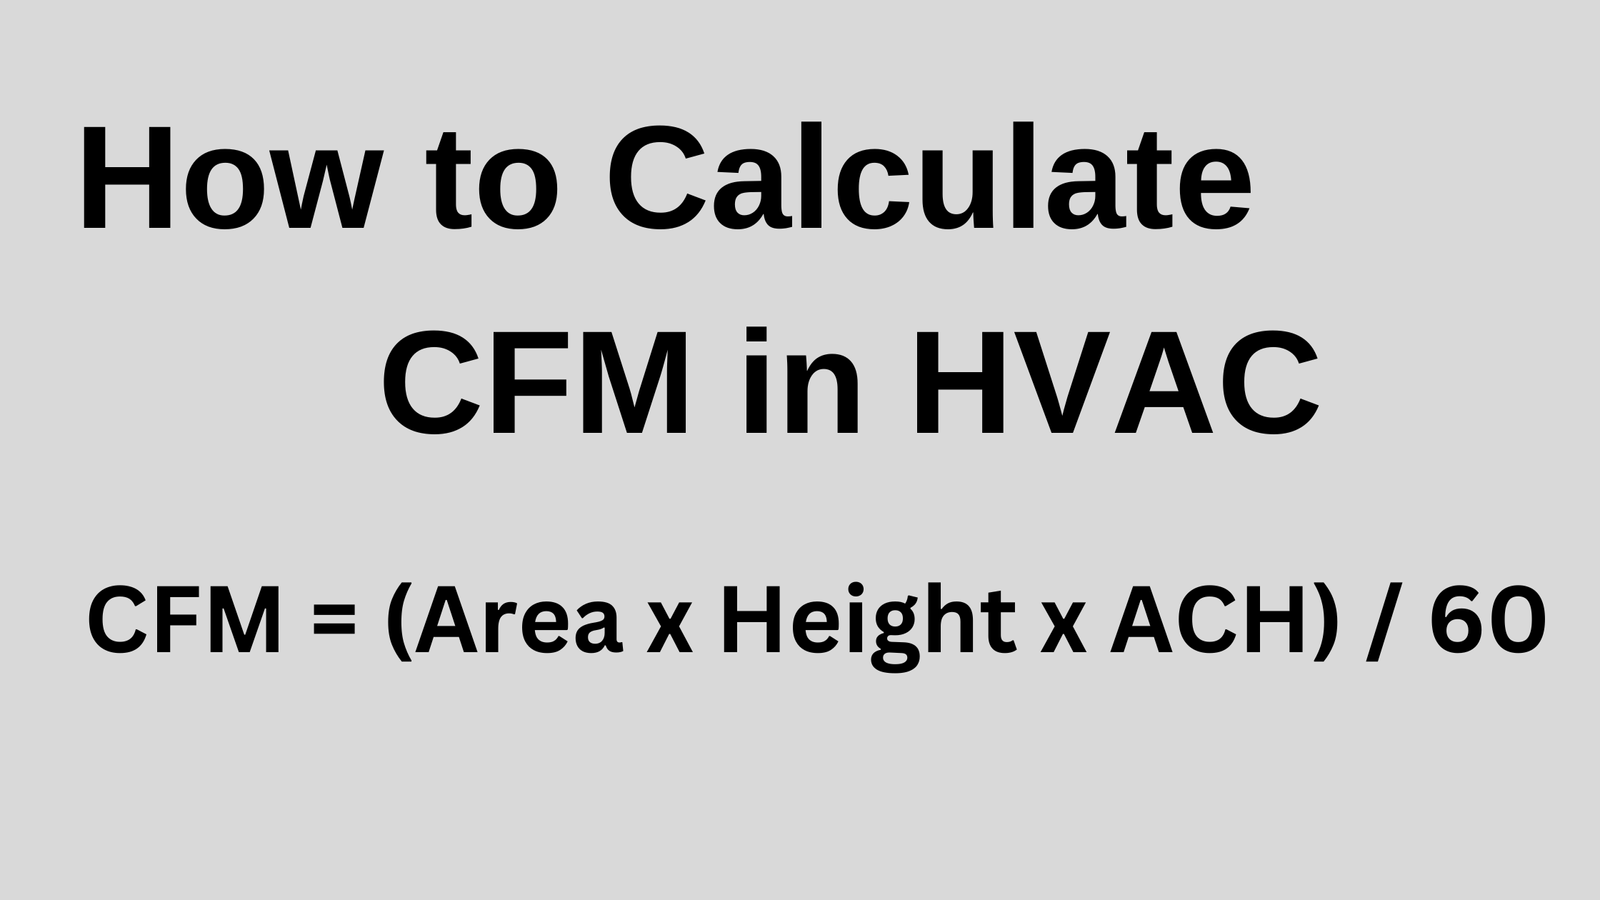 How to Calculate CFM in HVAC